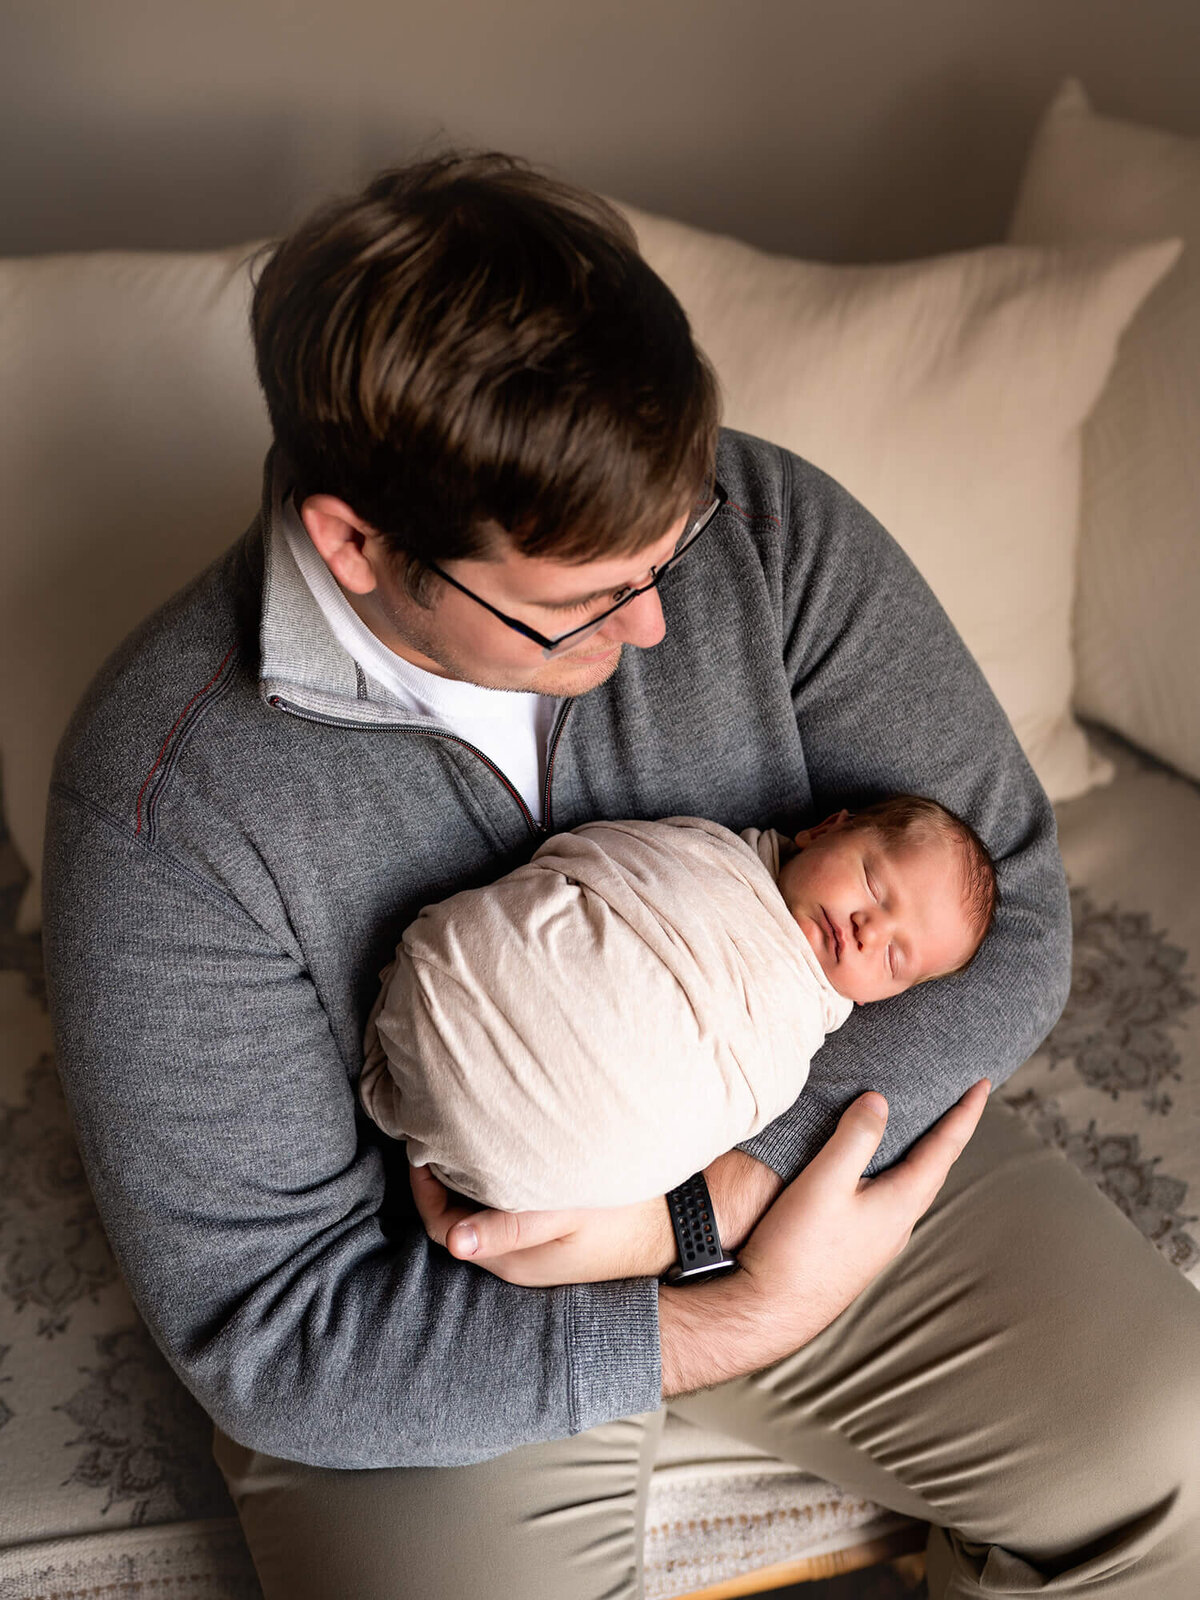 A new dad holds his newborn baby boy who is wrapped in a white blanket and sleeping peacefully